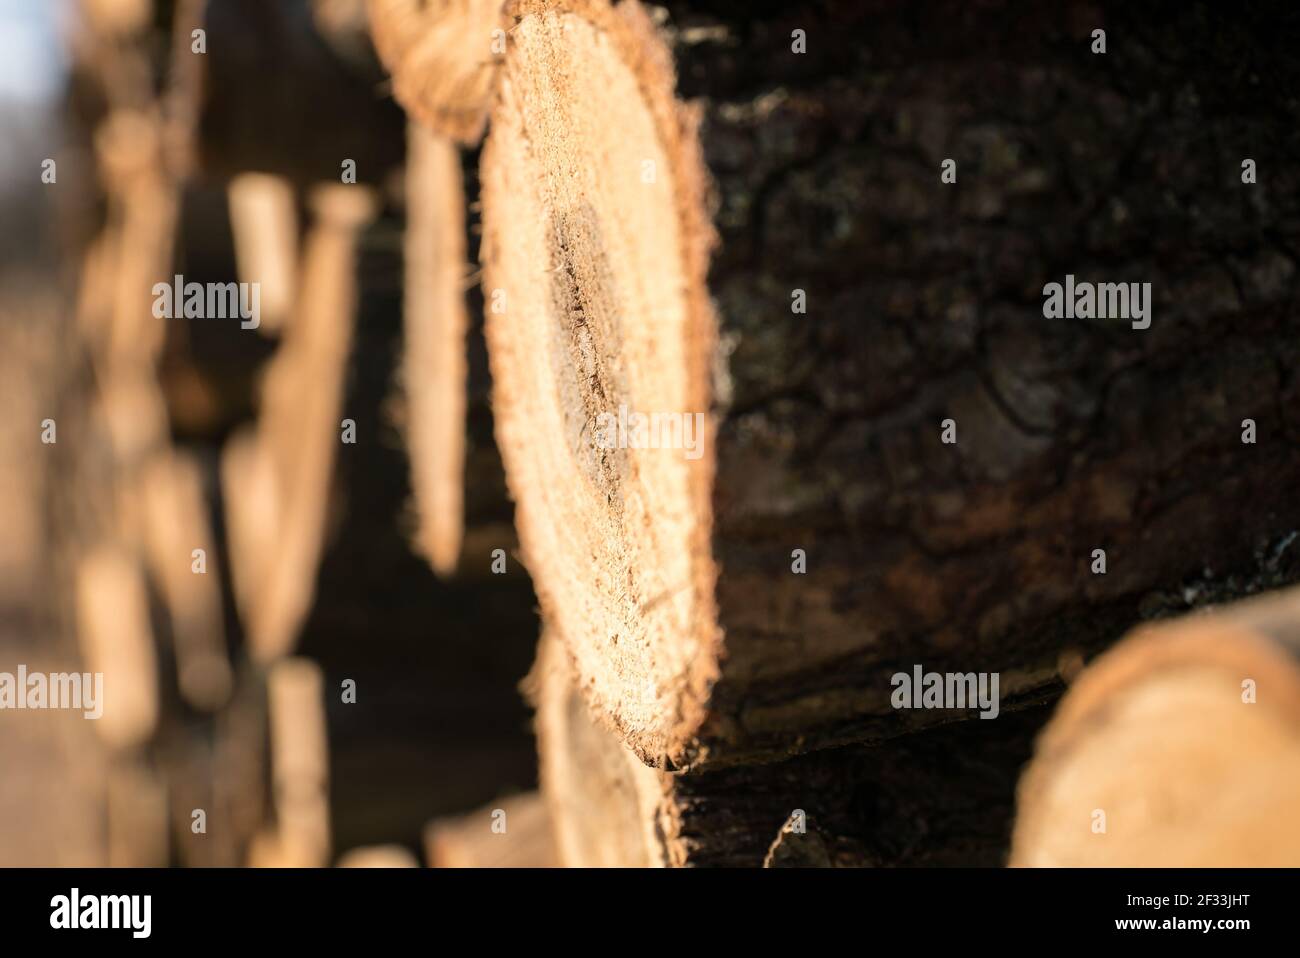 Logging in the winter. Logs are lined up. Stock photo. Stock Photo